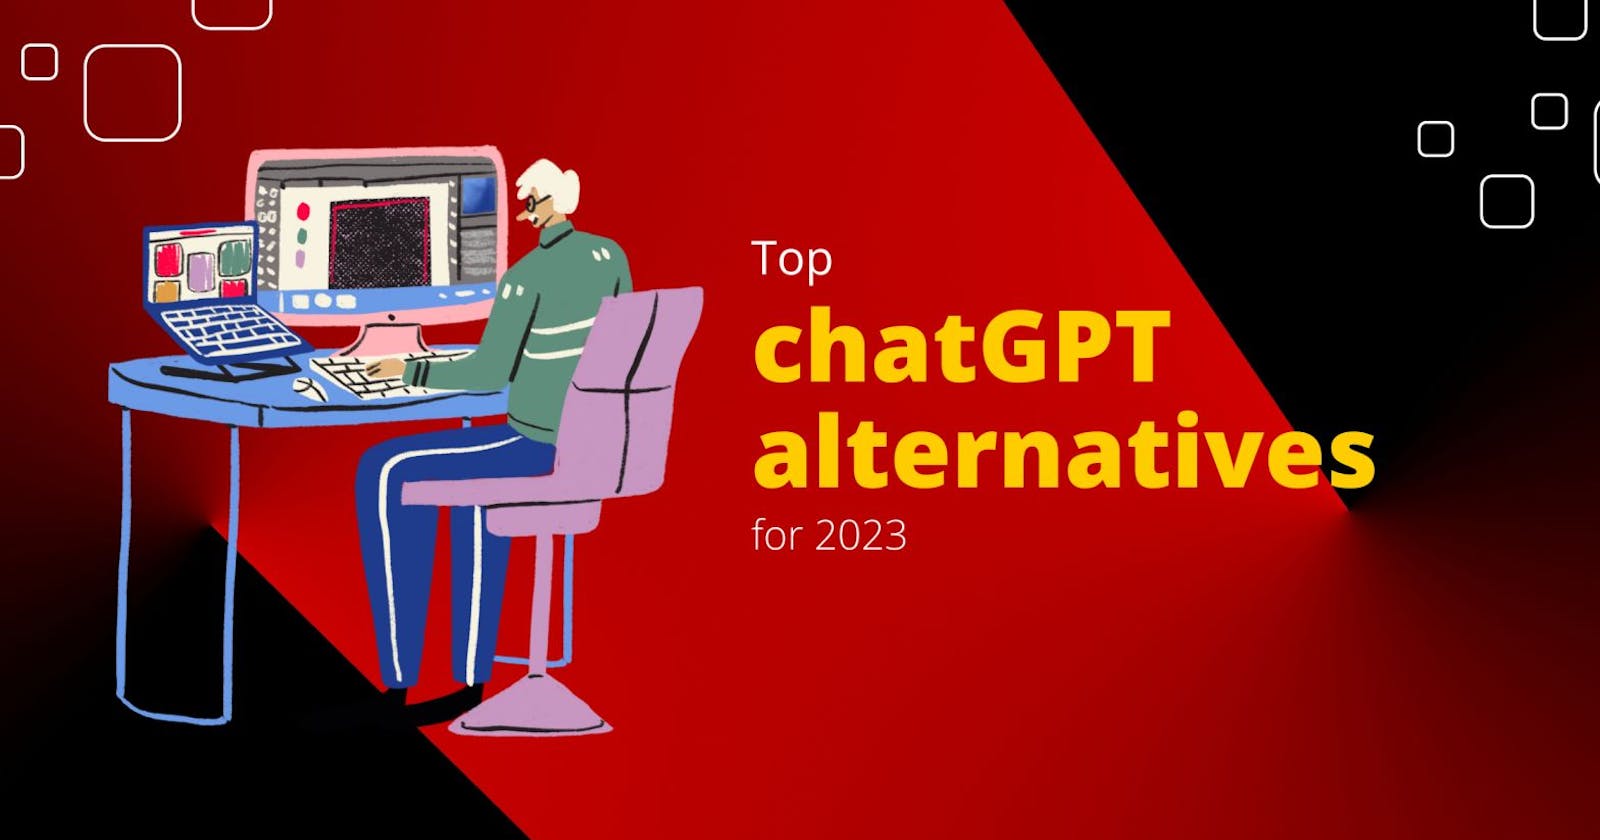 The 3 Best Alternatives to ChatGPT